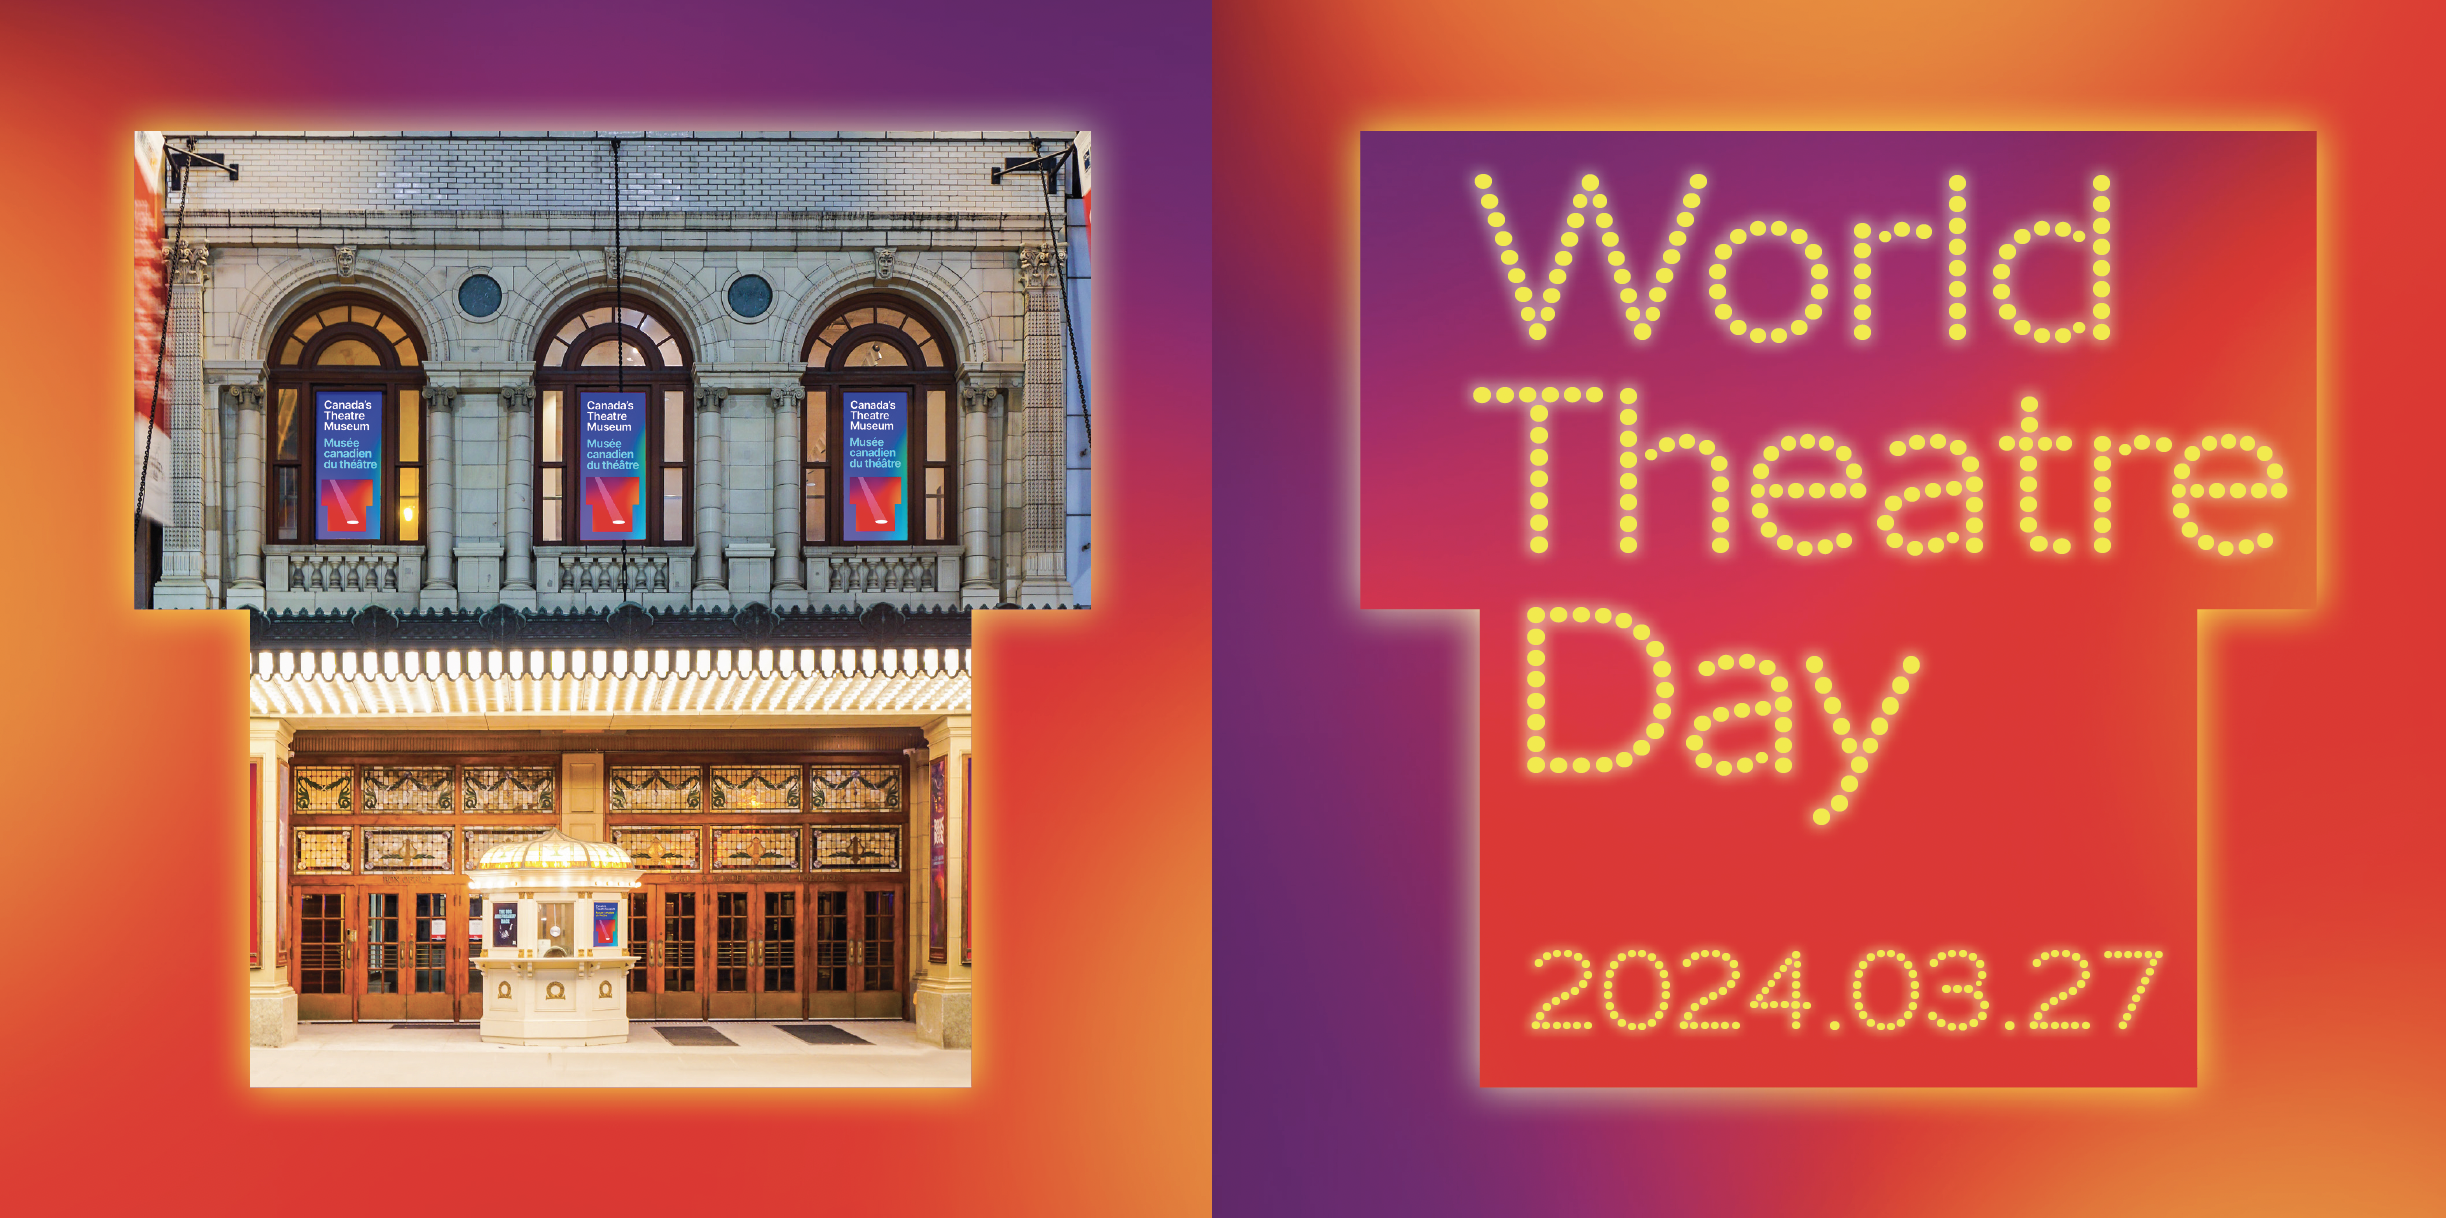 Thanks for joining us March 27 for World Theatre Day